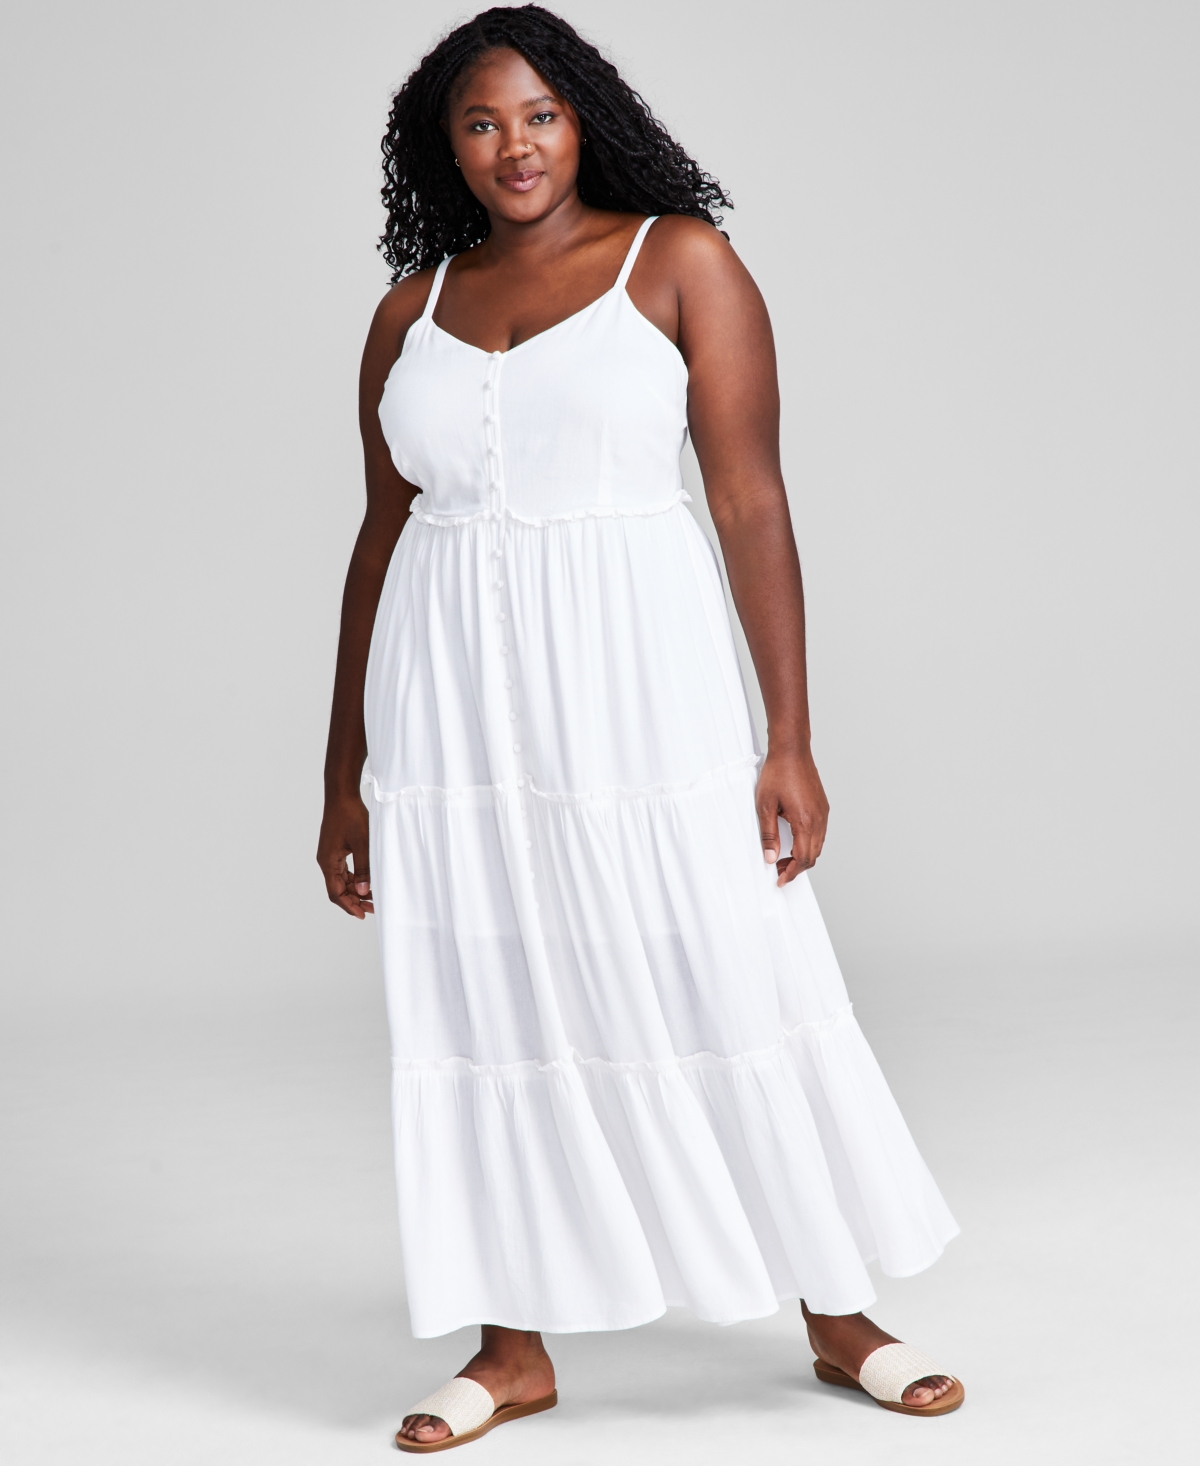 Trendy Plus Size Tiered Floral Maxi Dress, Created for Macy's - White